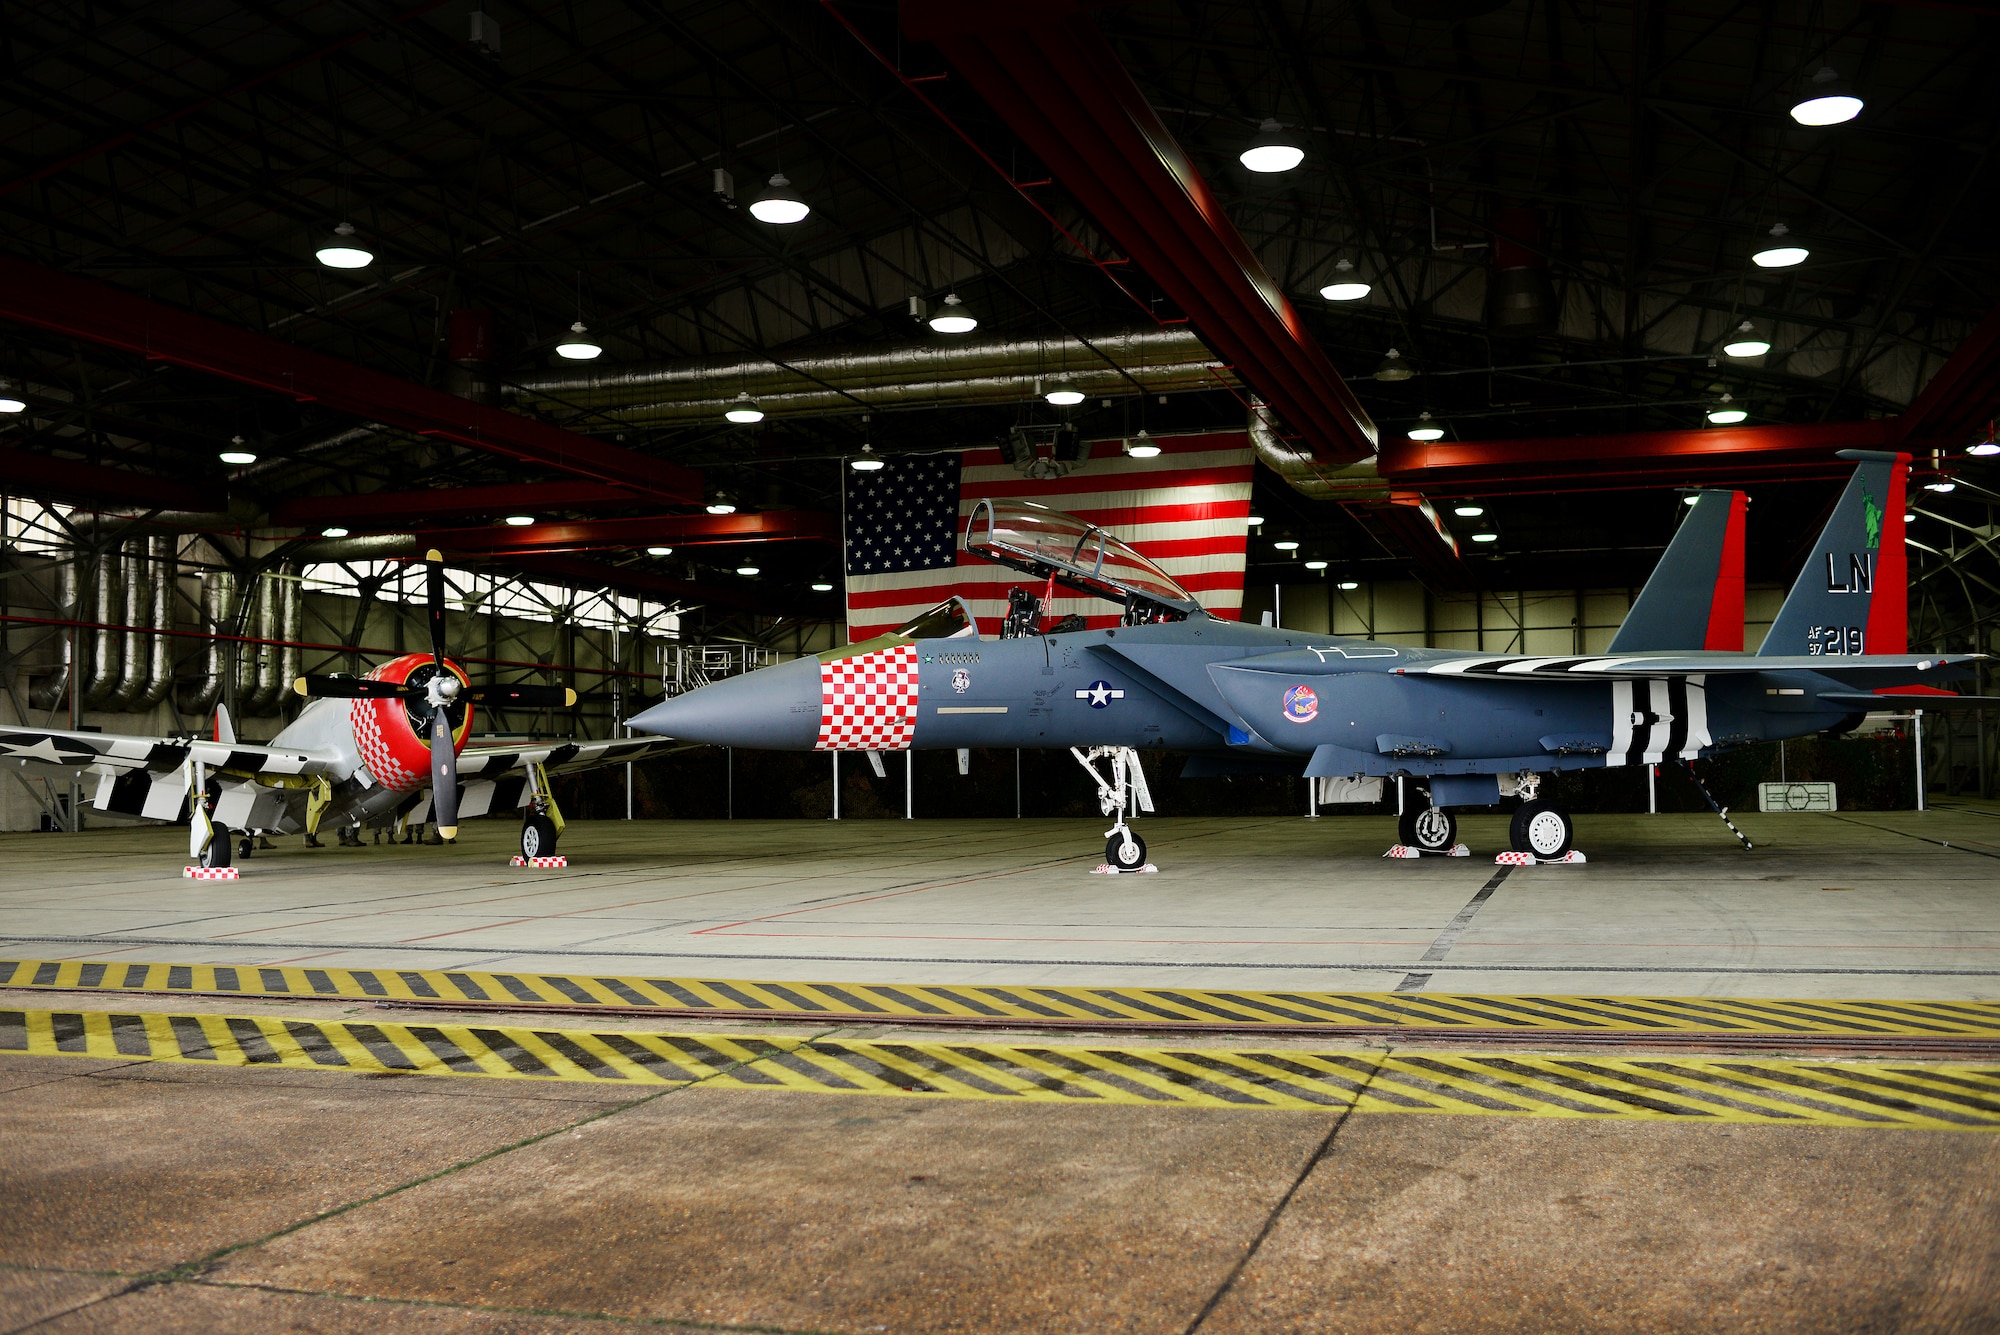 An F-15E Strike Eagle assigned to the 492nd Fighter Squadron is painted in the heritage colors of its World War II P-47 Thunderbolt predecessor at Royal Air Force Lakenheath, England Jan 31. The 48th Fighter Wing officially unveiled the aircraft publicly during a ceremony on Jan 31. (U.S. Air Force photo/Tech. Sgt. Matthew Plew)